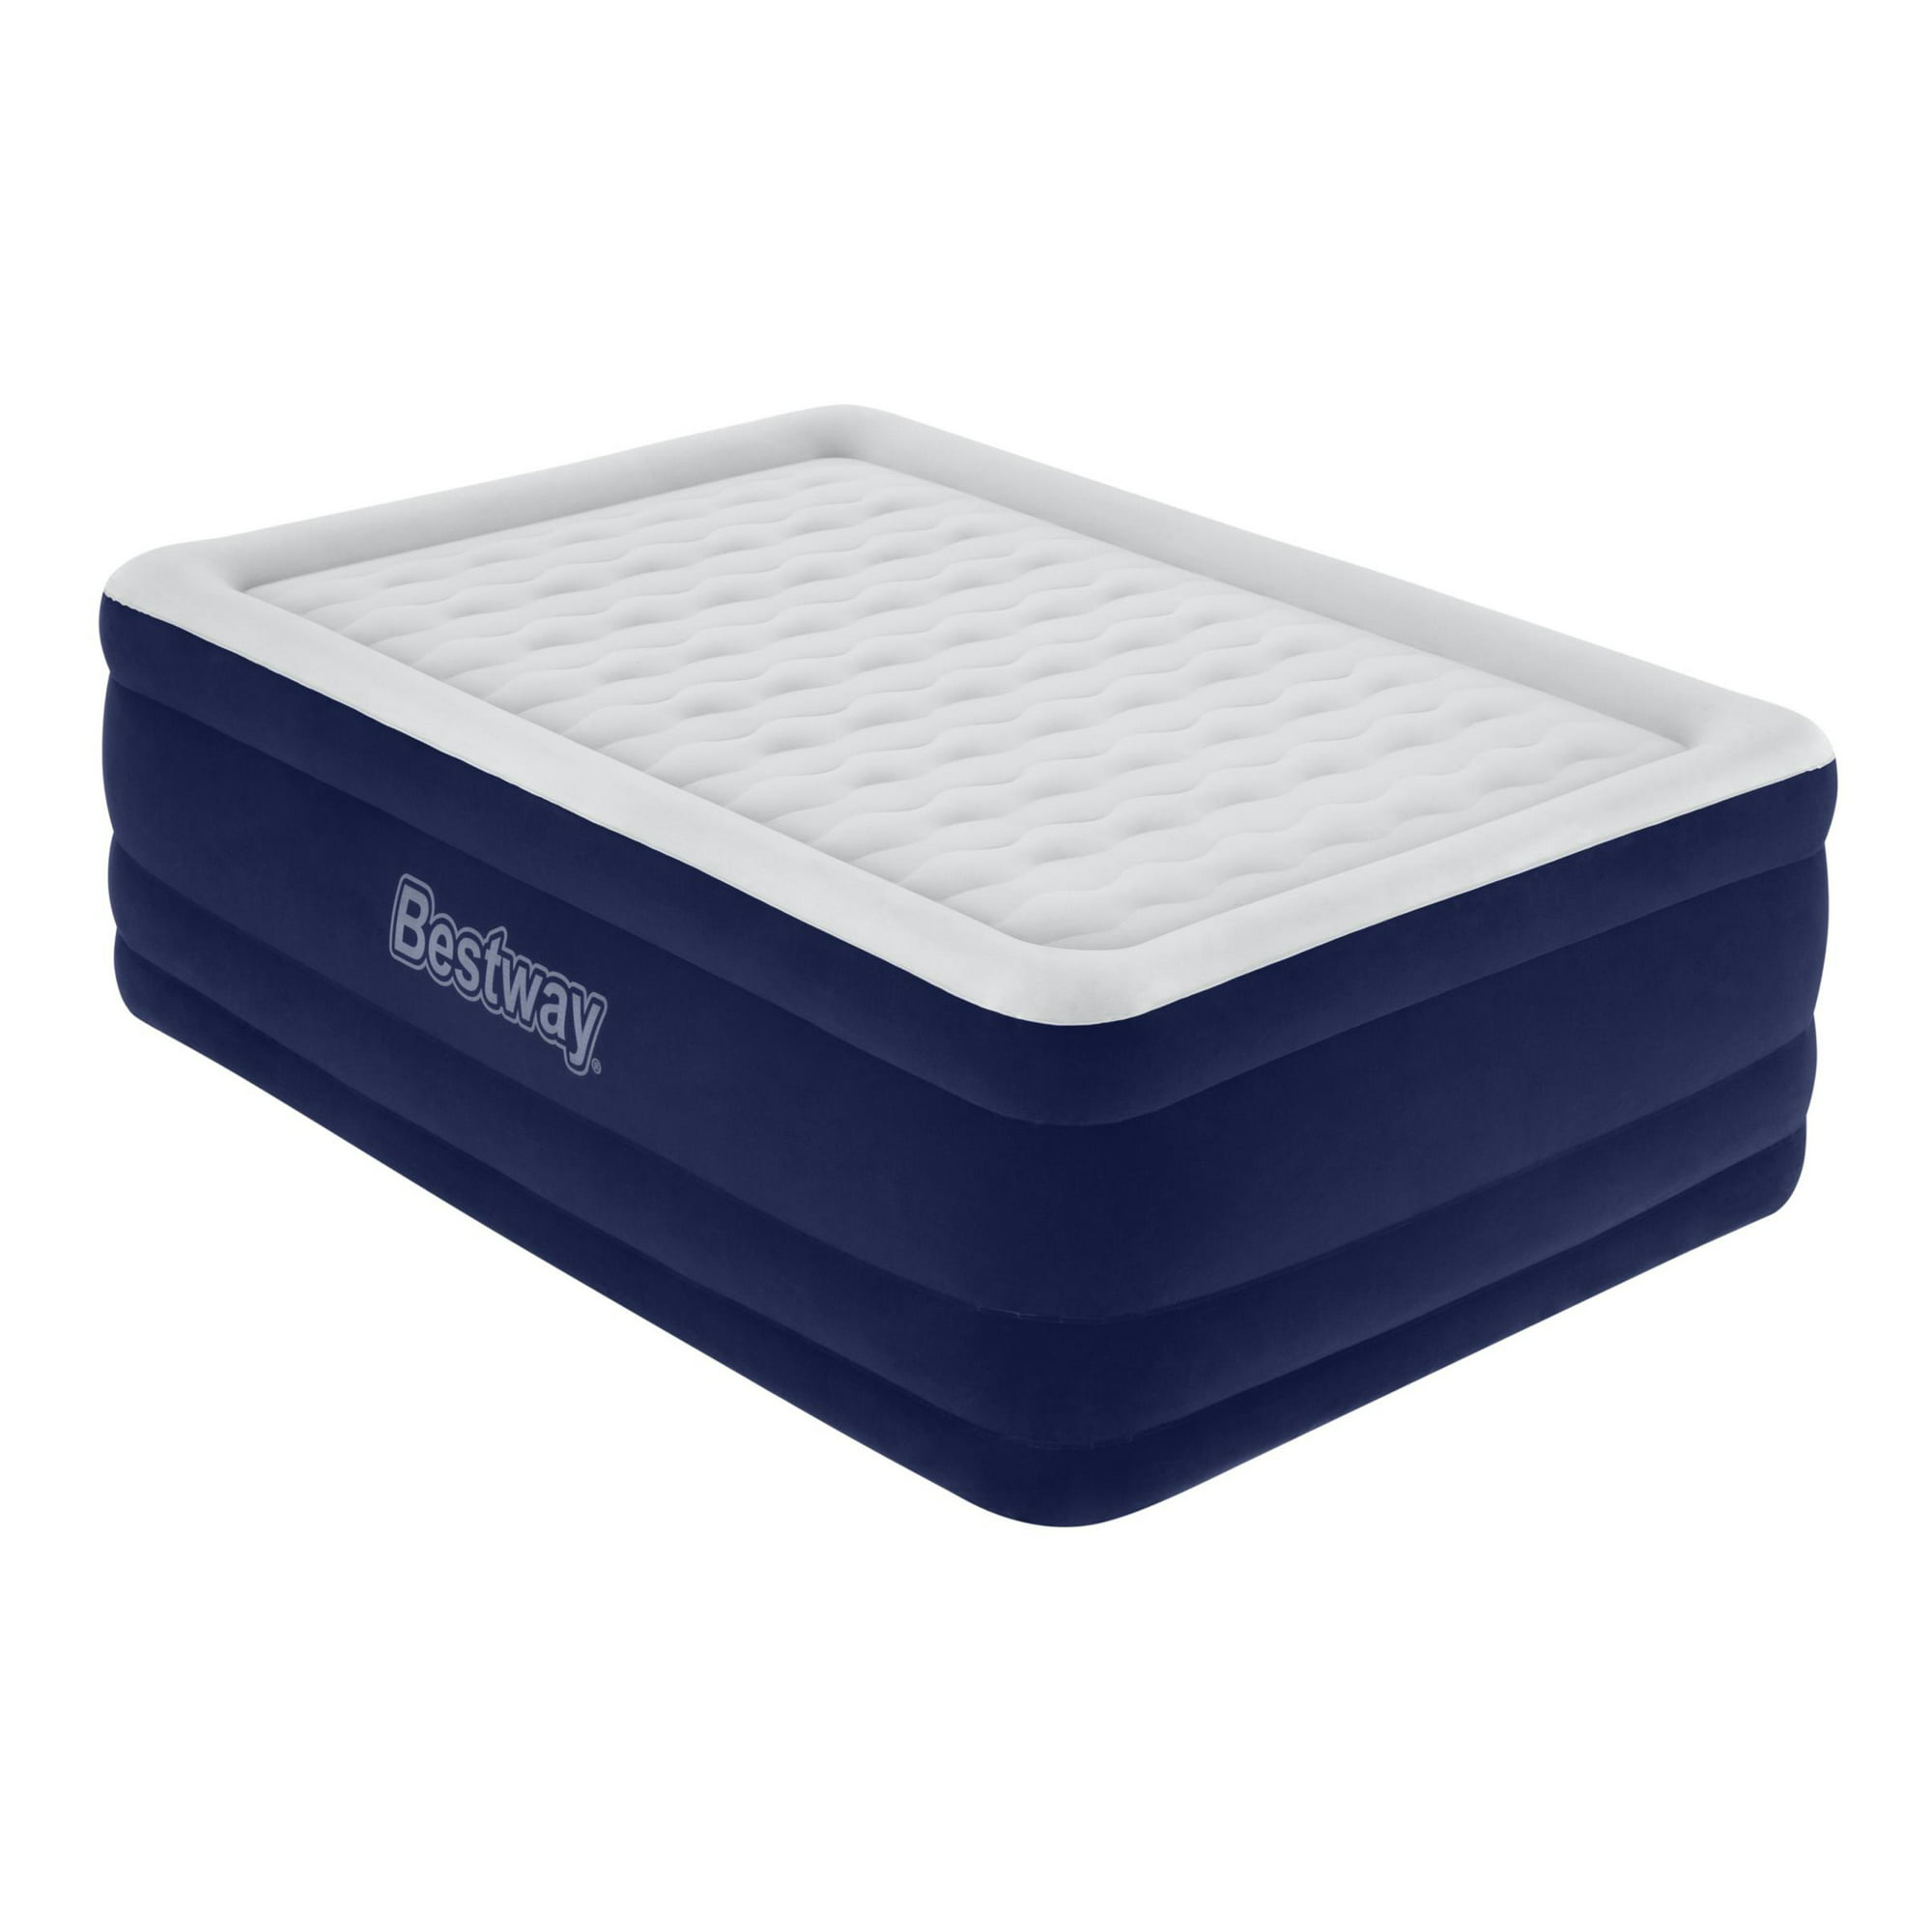 24" Bestway Tritech Antimicrobial Coating Air Mattress w/ Built-In AC Pump (Full) $39.48 + Free Shipping